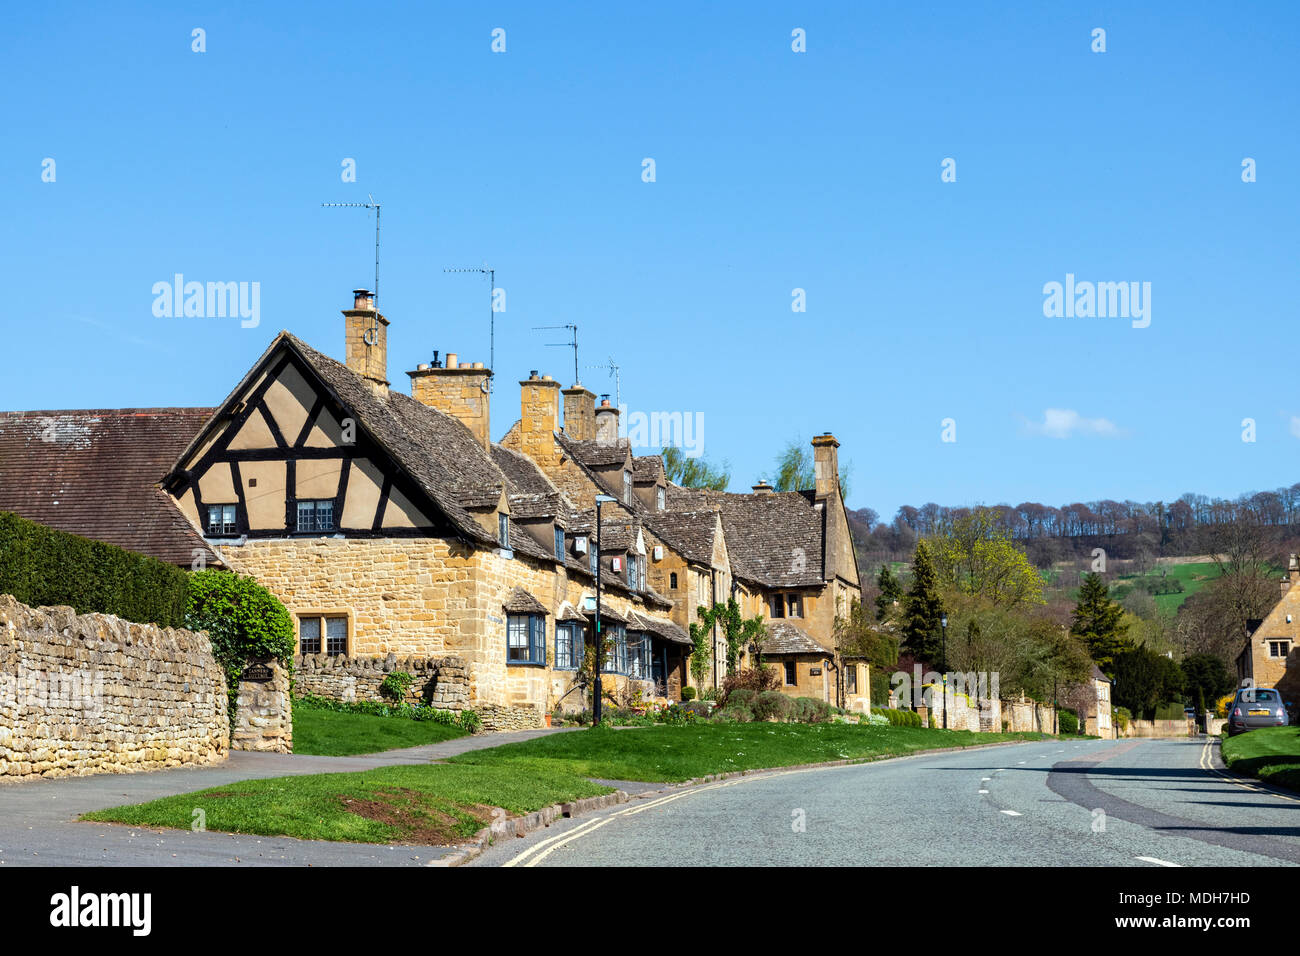 High Street, Broadway, Cotswolds on a sunny spring day with blue skies. Stock Photo